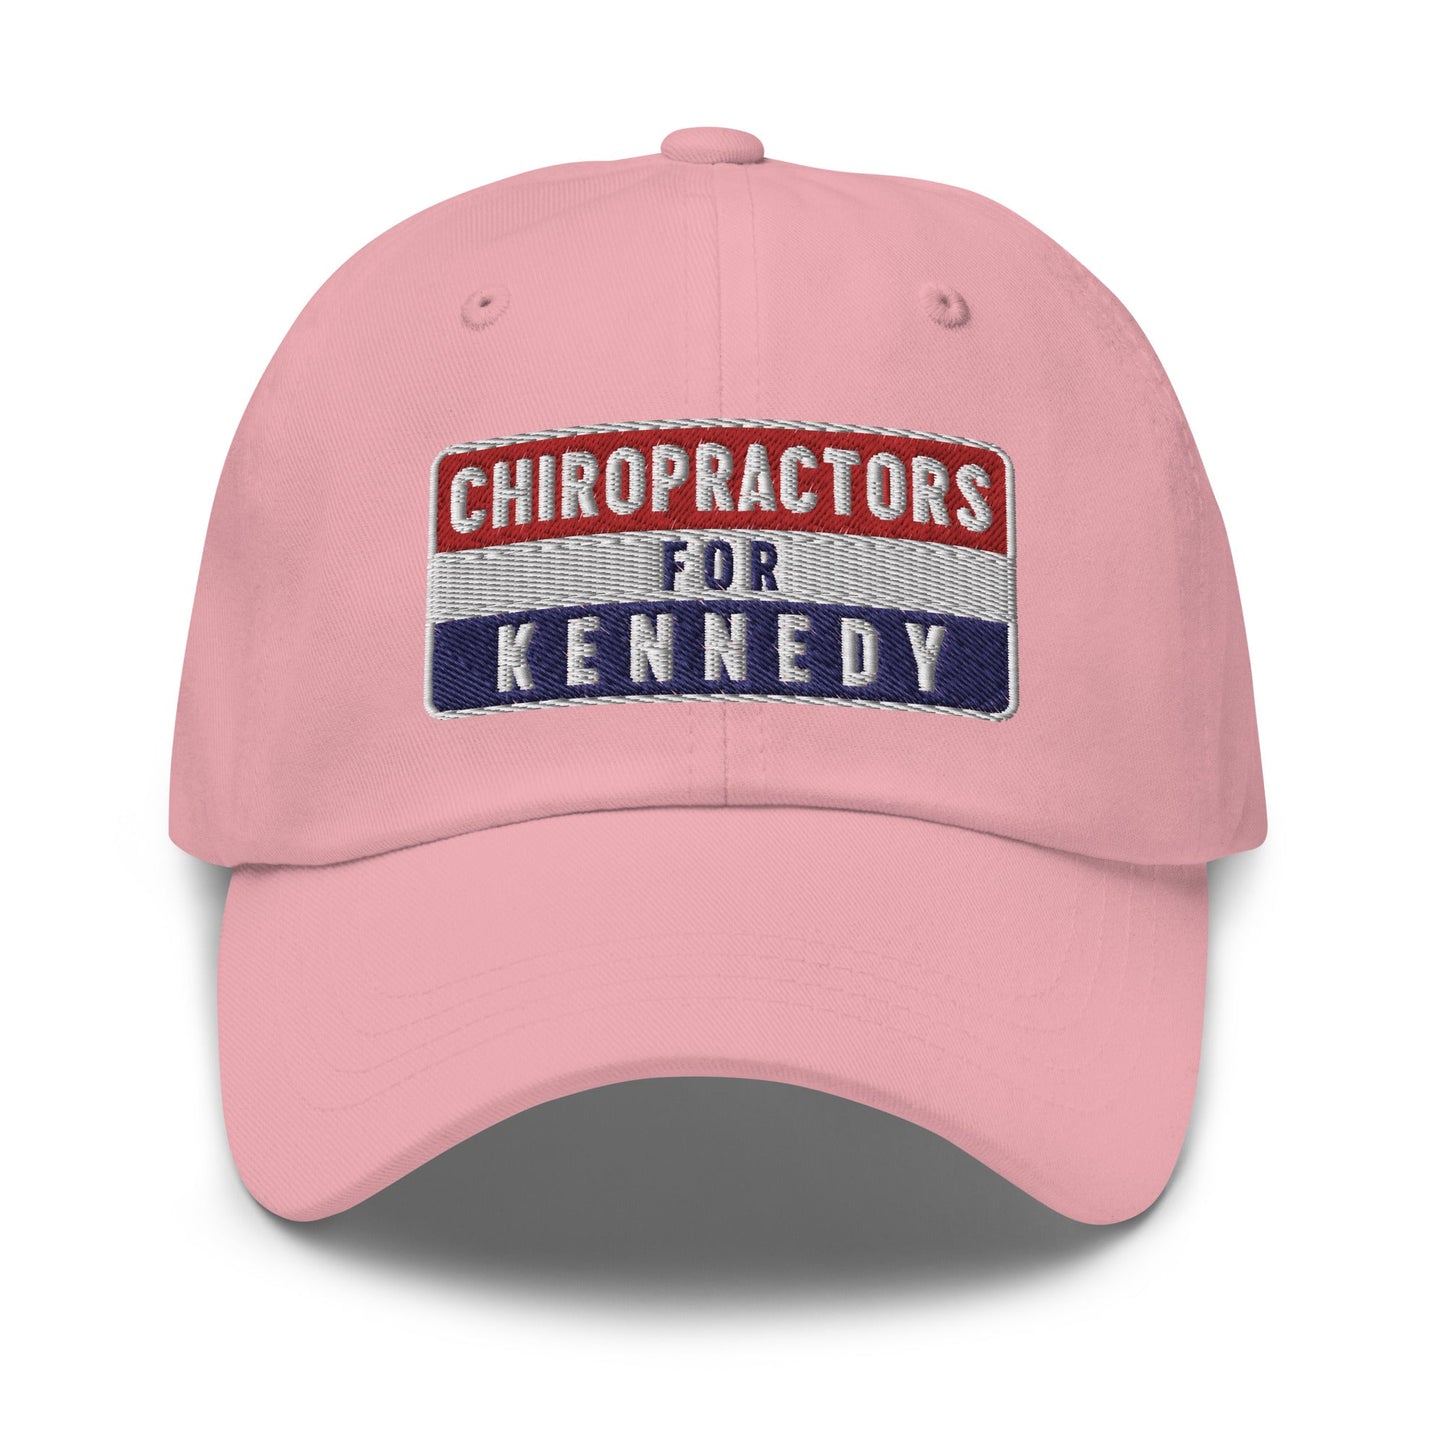 Chiropractors for Kennedy Dad Hat - TEAM KENNEDY. All rights reserved